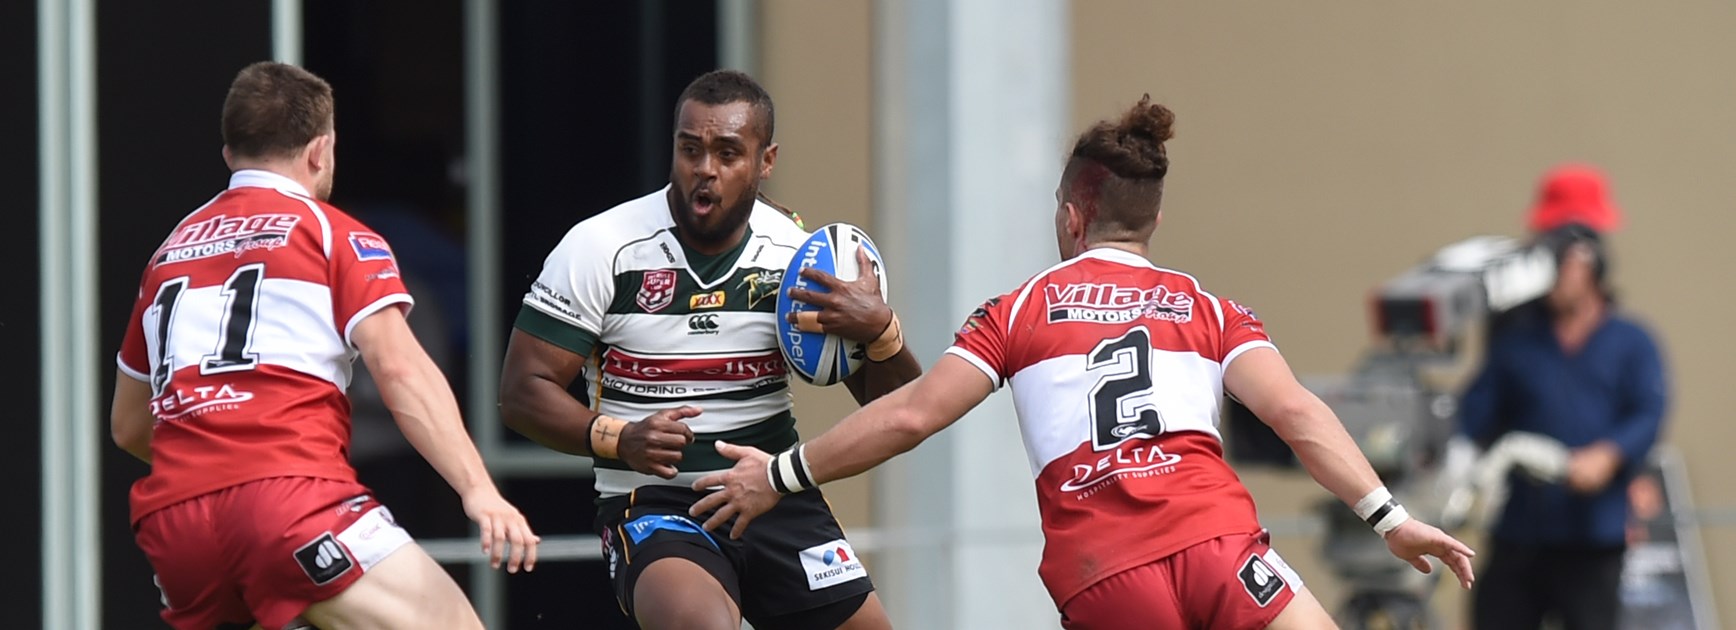 Nemani Valekapa in action for the Ipswich Jets against the Redcliffe Dolphins.